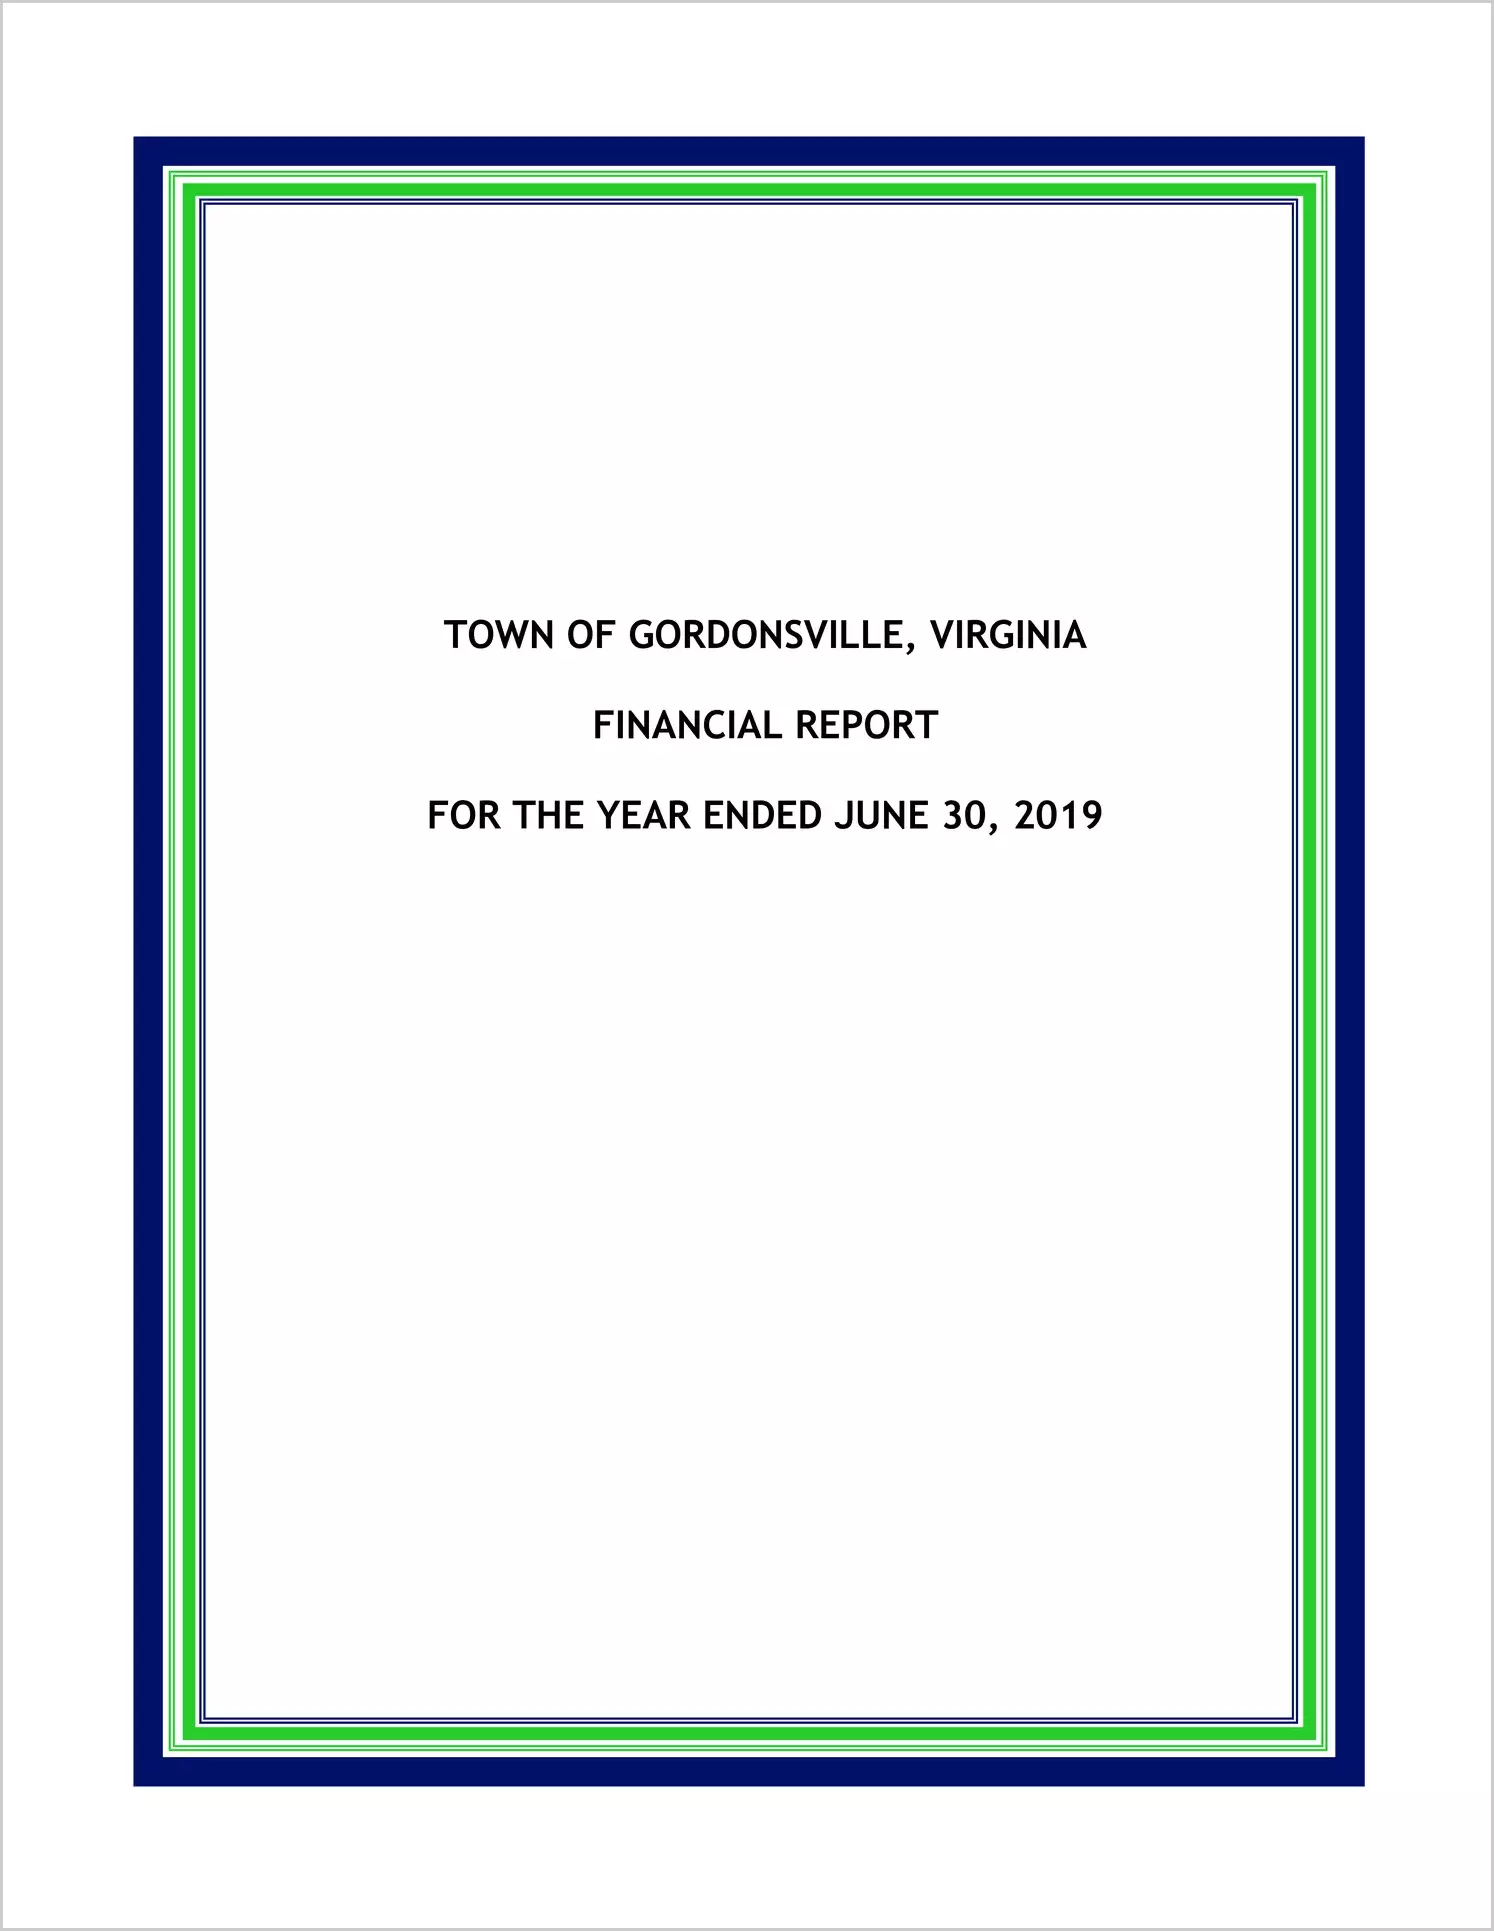 2019 Annual Financial Report for Town of Gordonsville